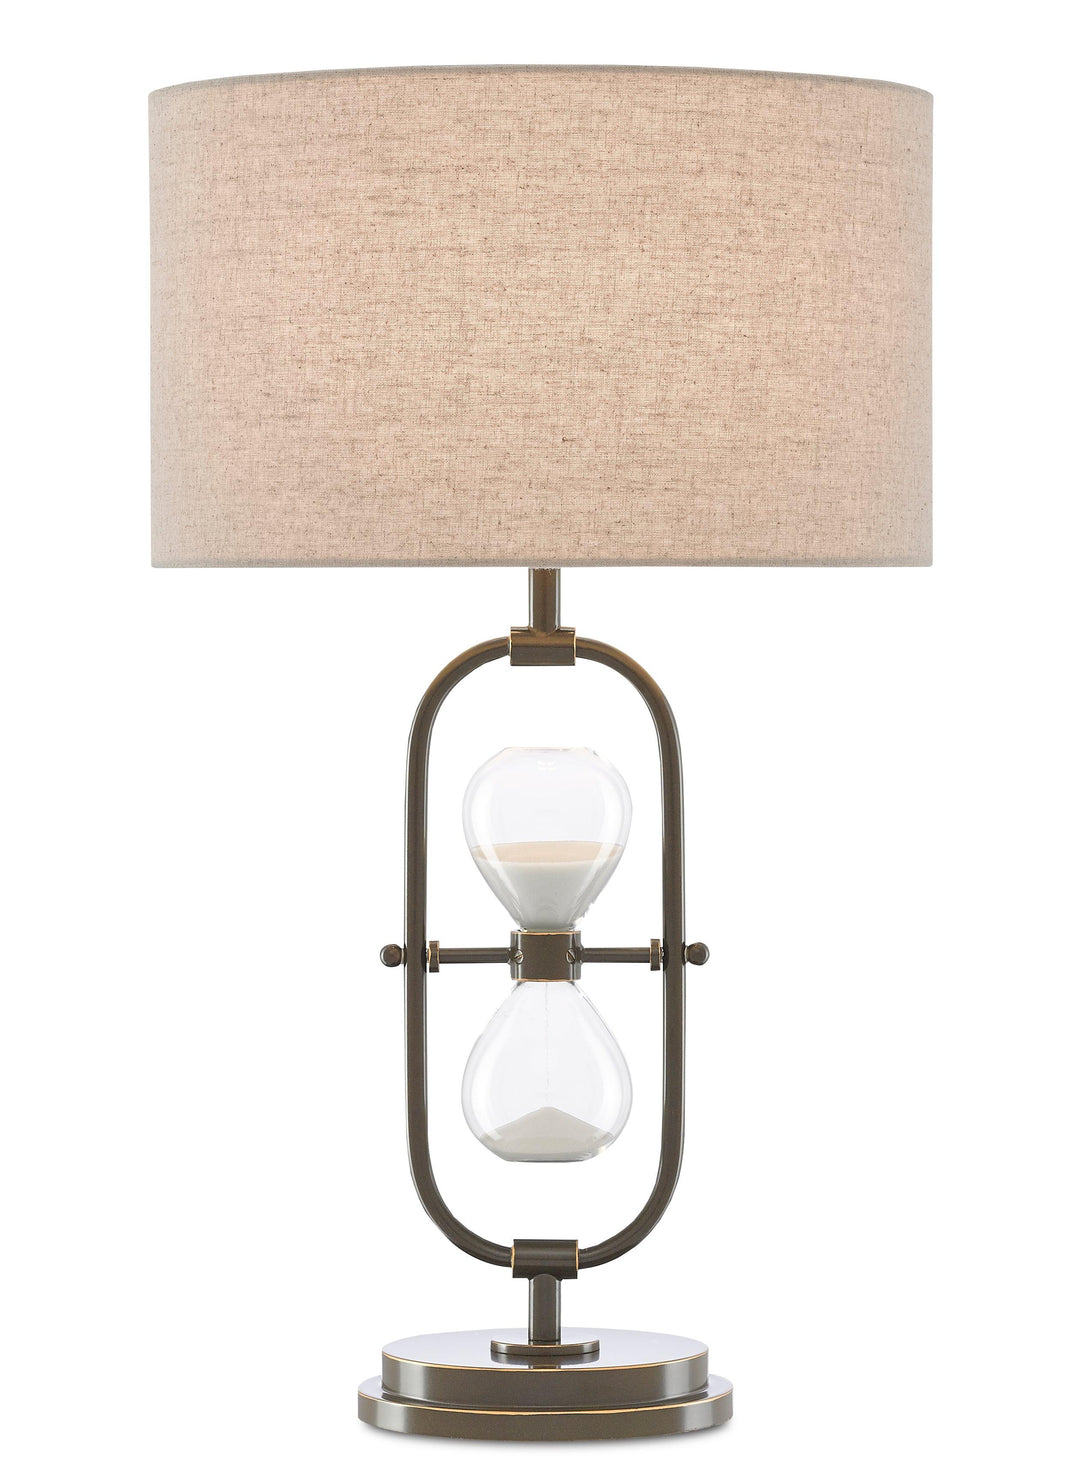 Chronicle Table Lamp - Casey & Company